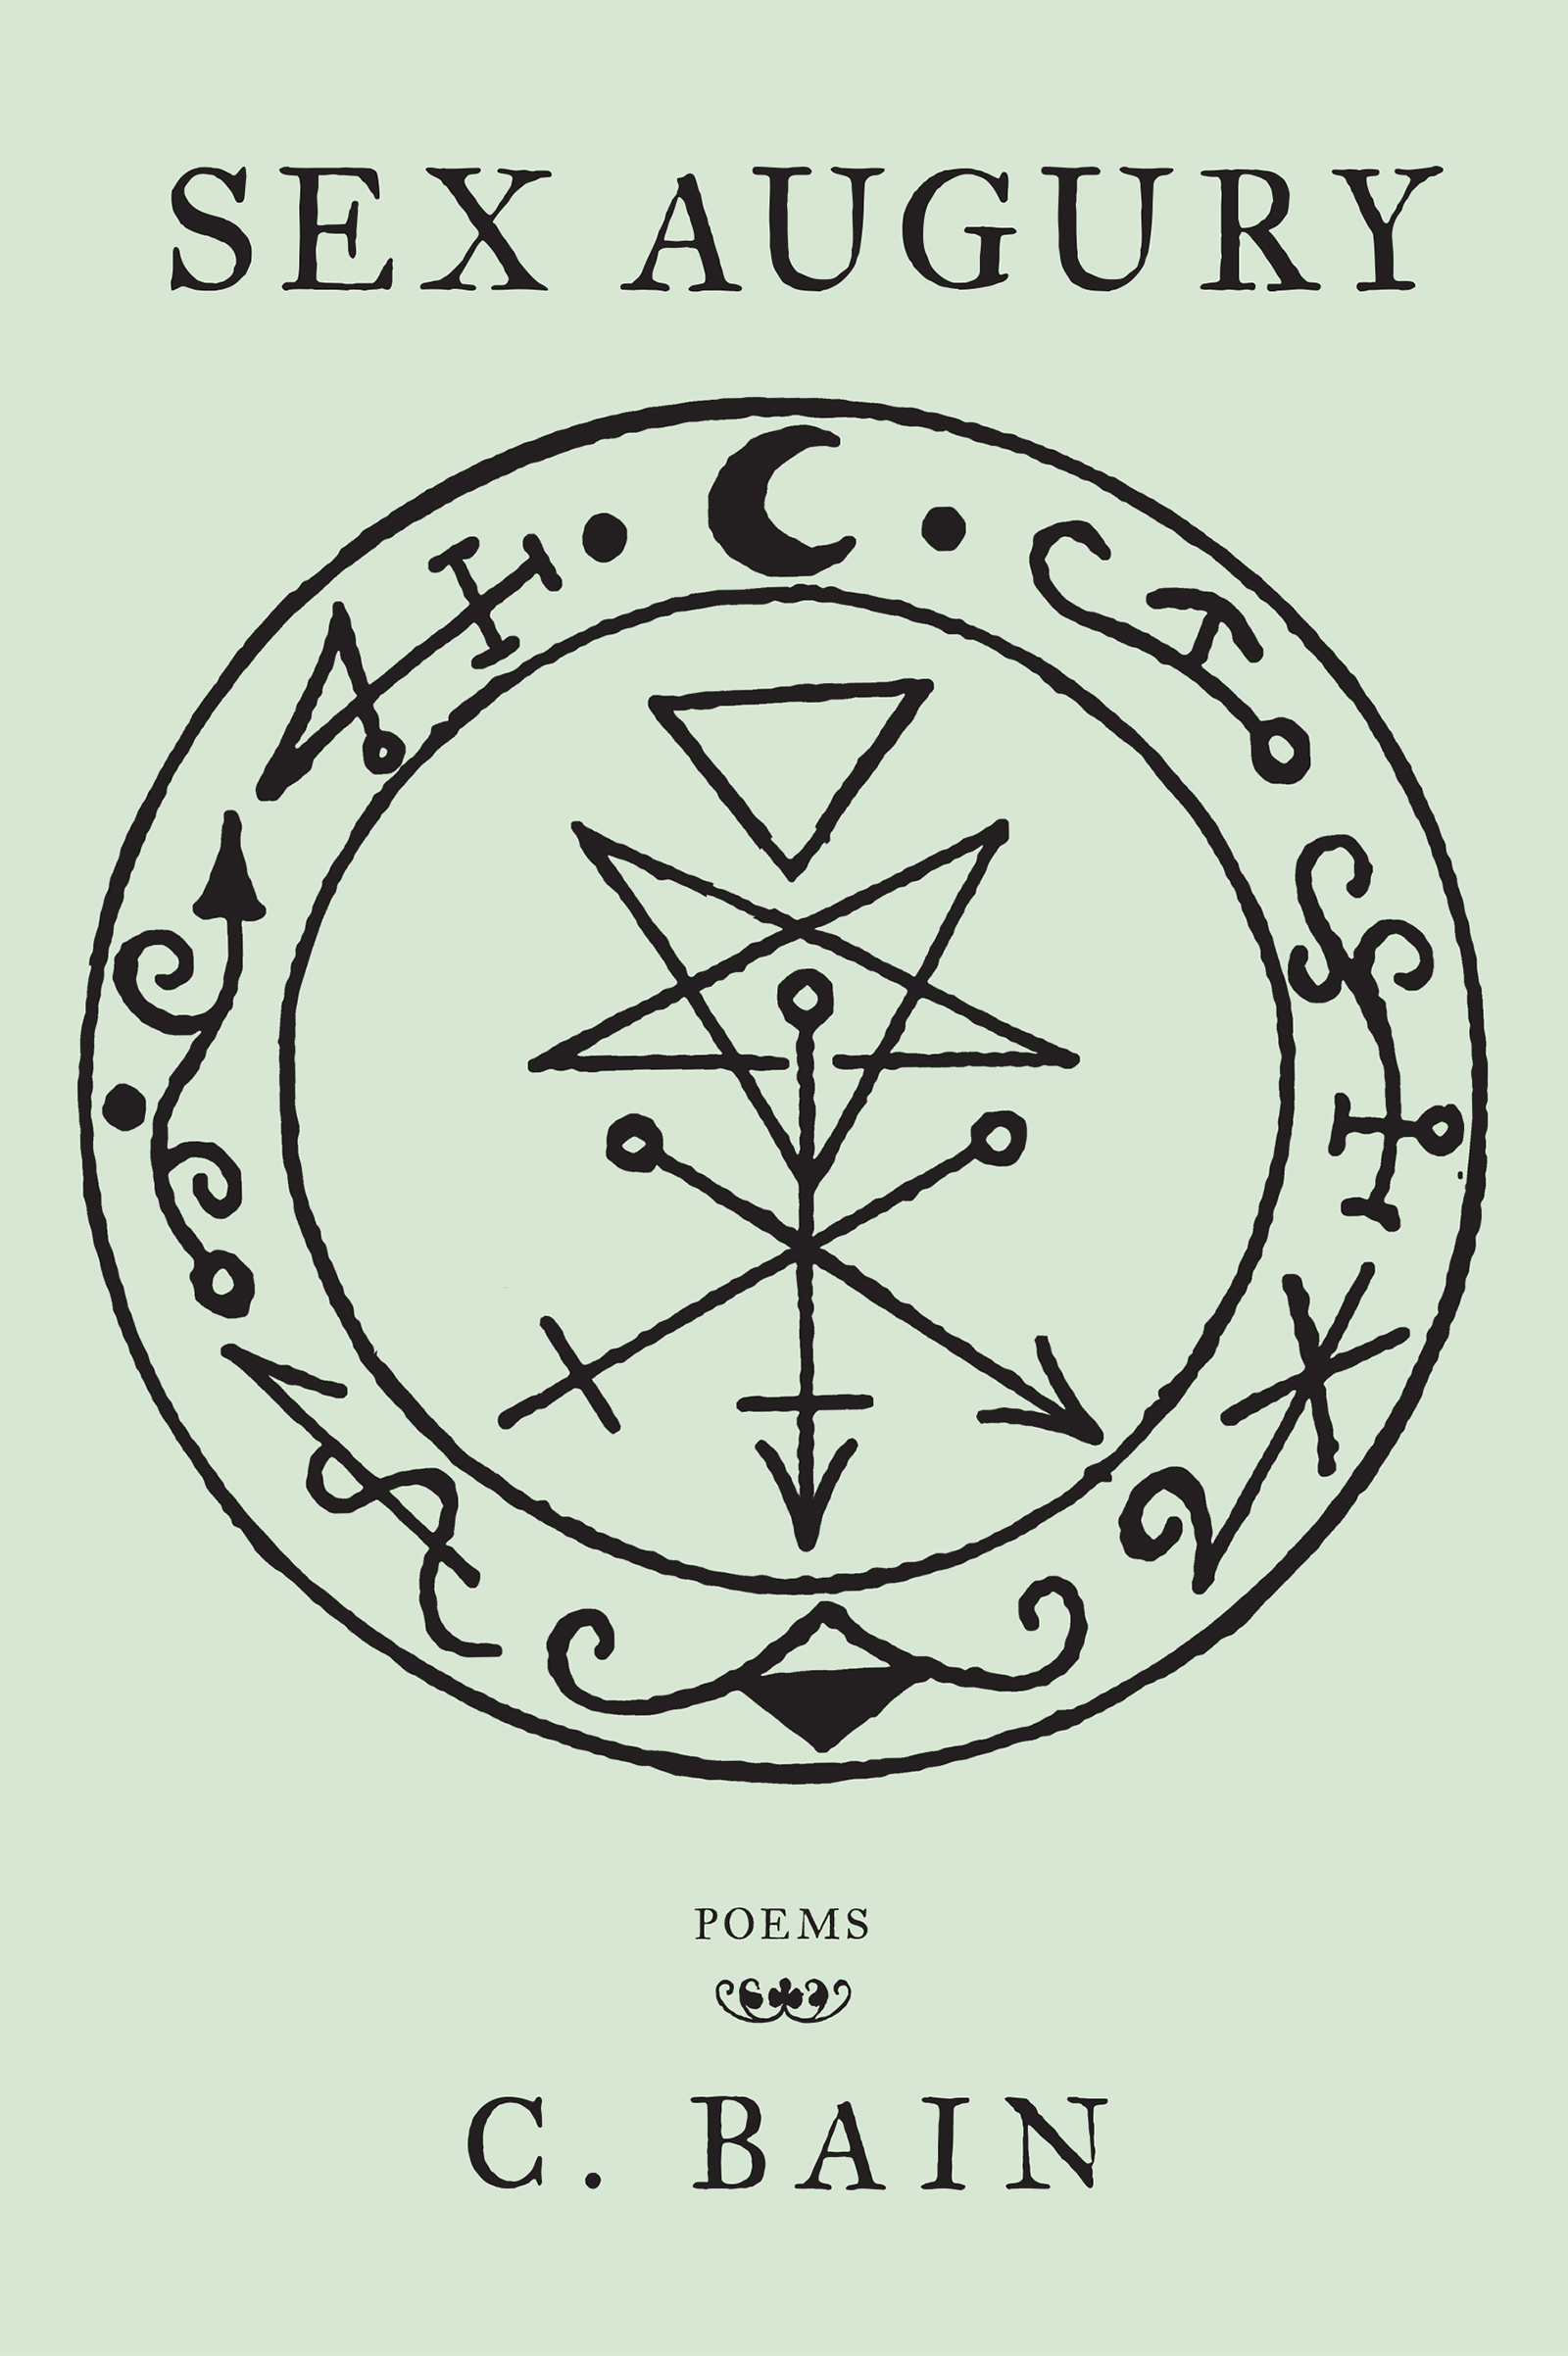 Black symbols, including those related to the trans communities, sit in a pagan-like ritualistic circle. Text reads "Sex Augury, Poems by C. Bain"